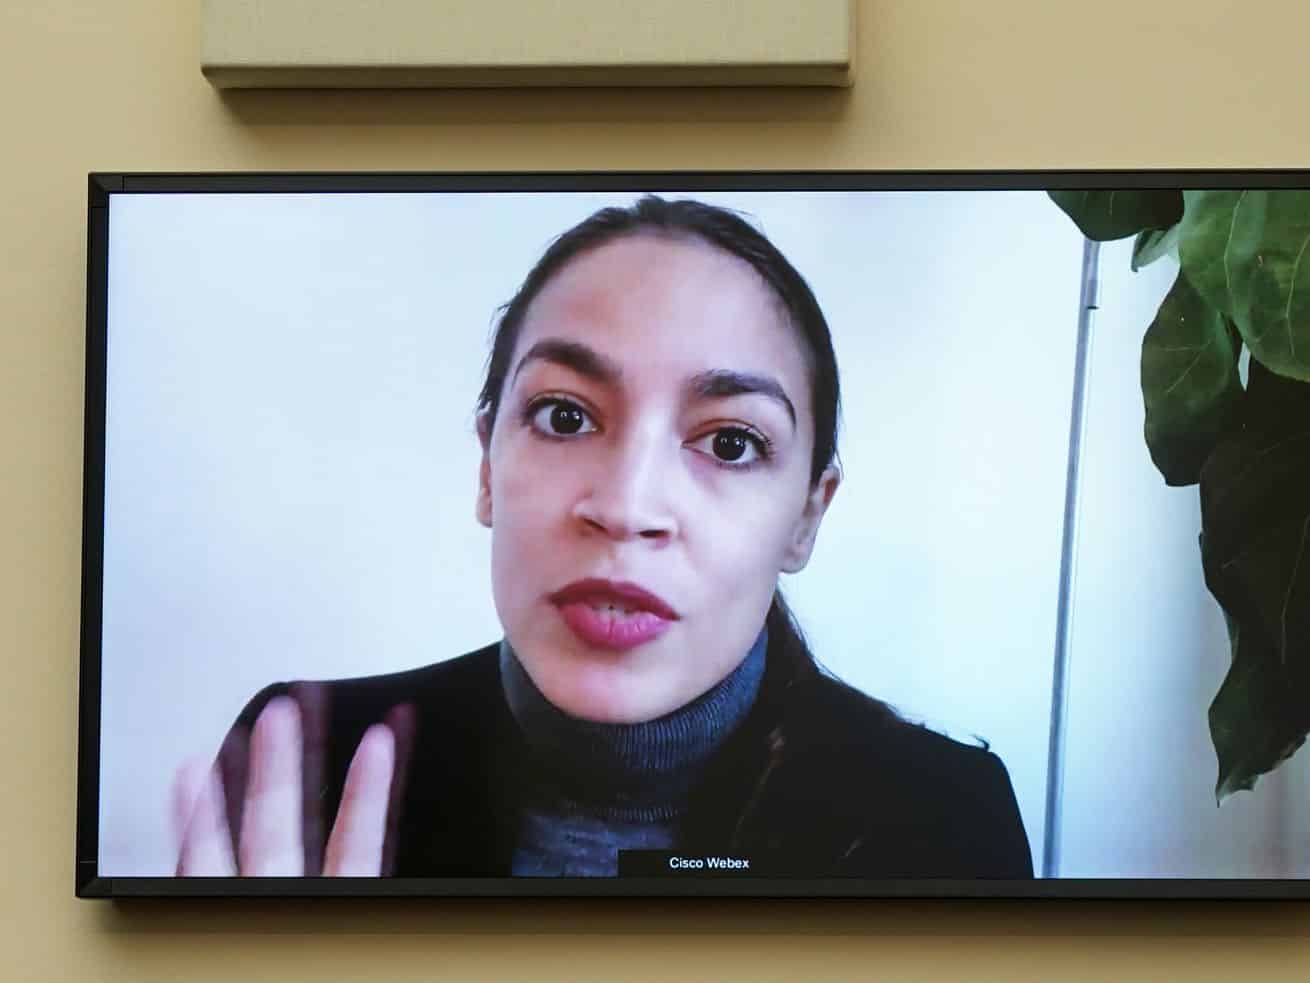 “I thought I was going to die”: AOC’s harrowing account of the Capitol Hill attack